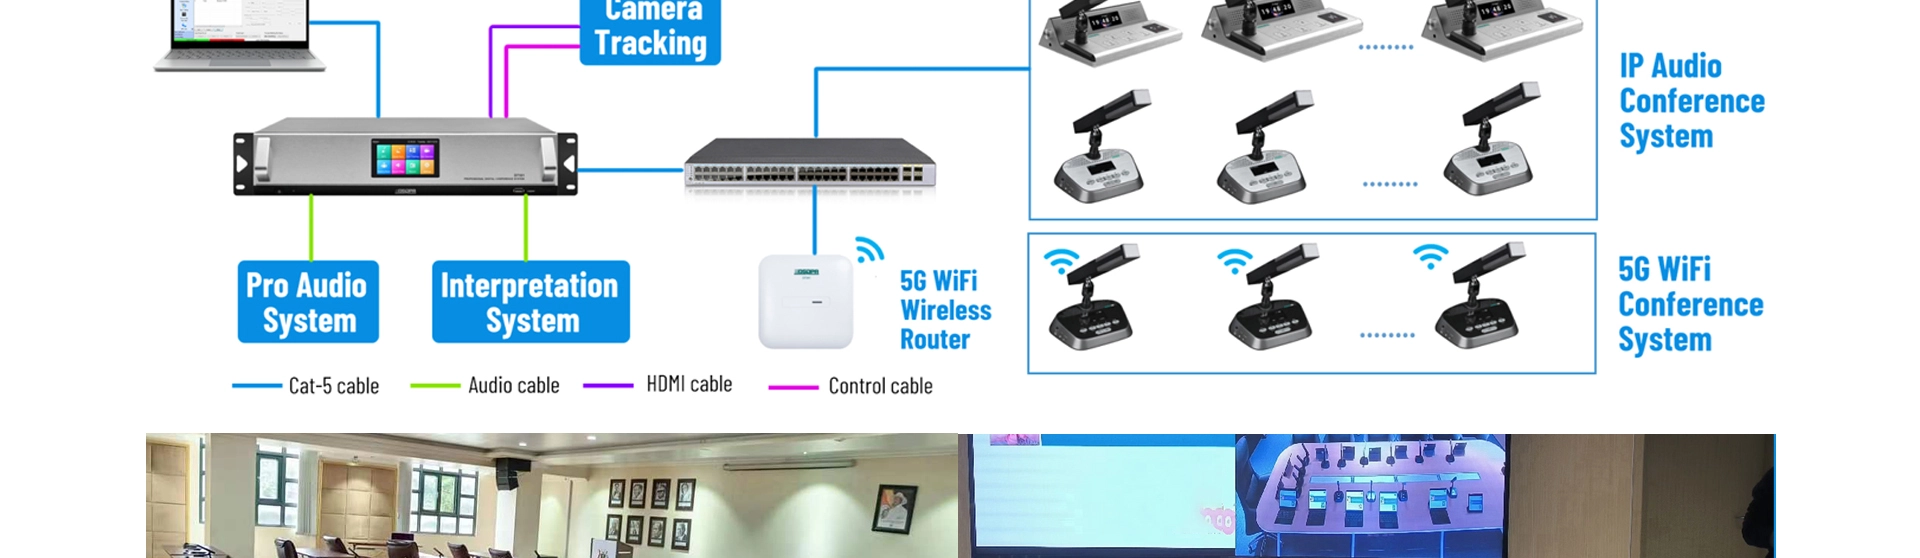 Wireless Conference System 5G WiFi Wireless Discussion Delegate Unit